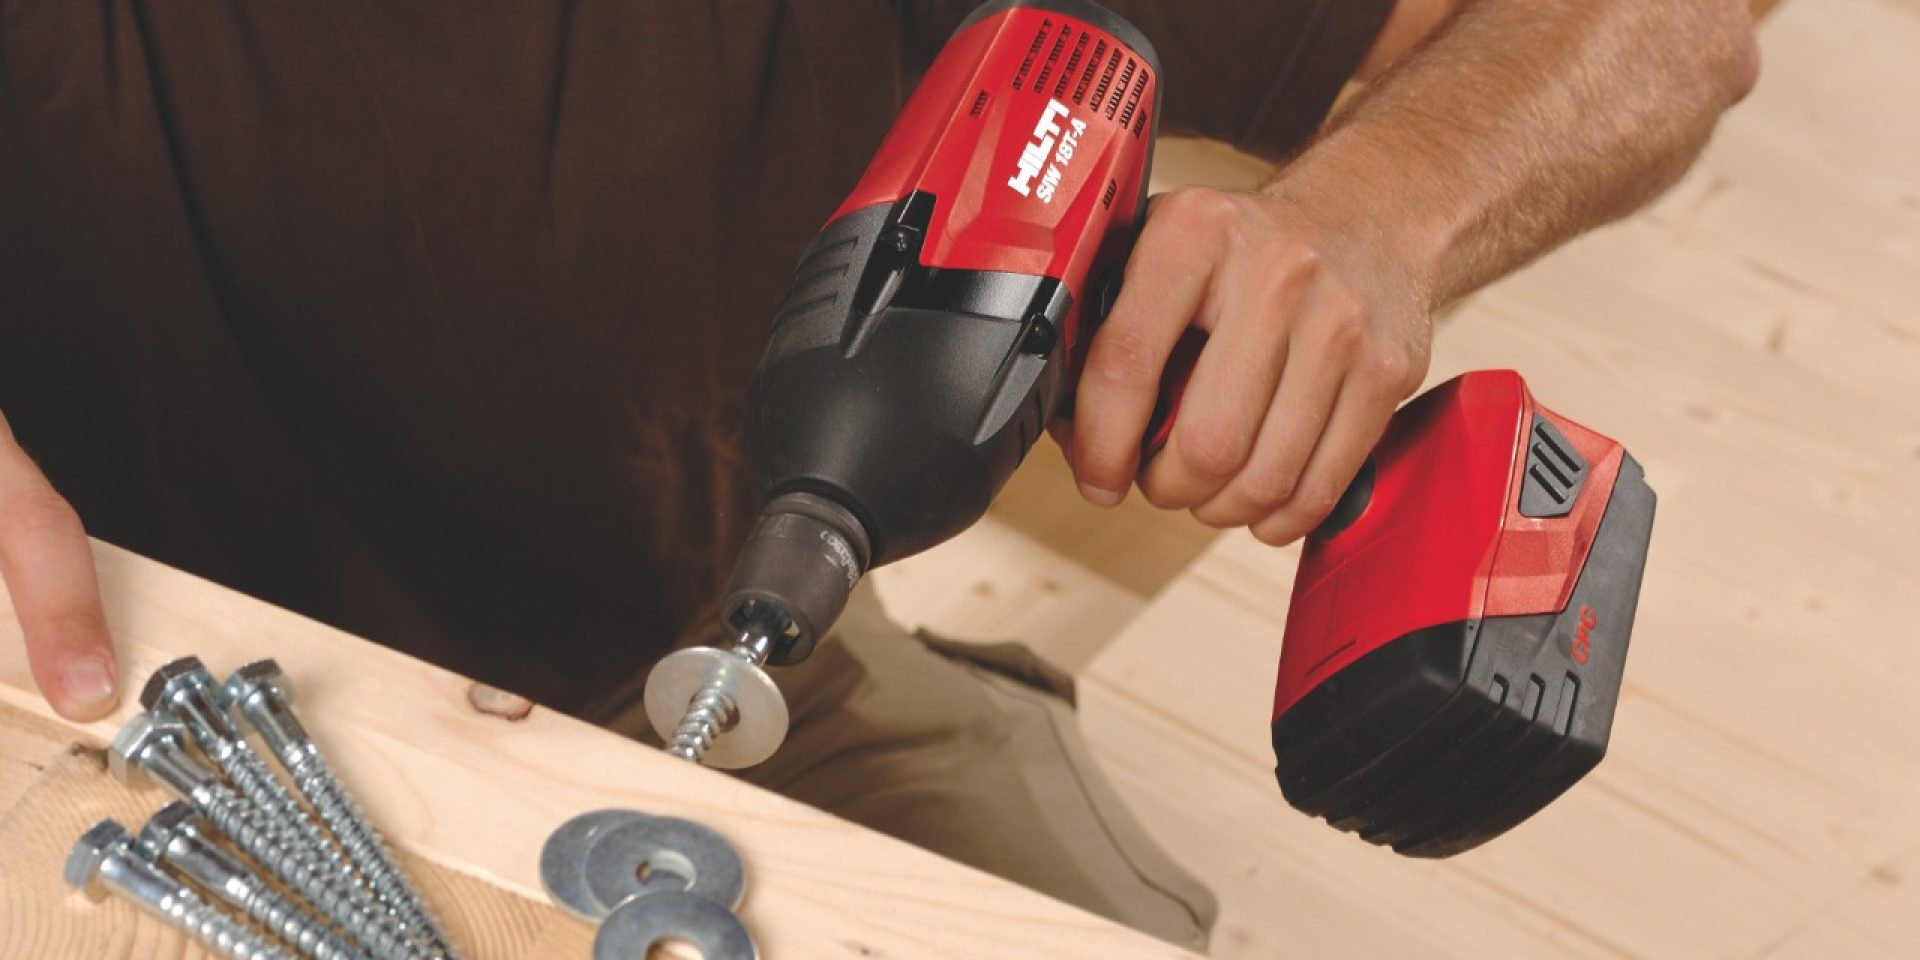 Hilti smart tool for fastening